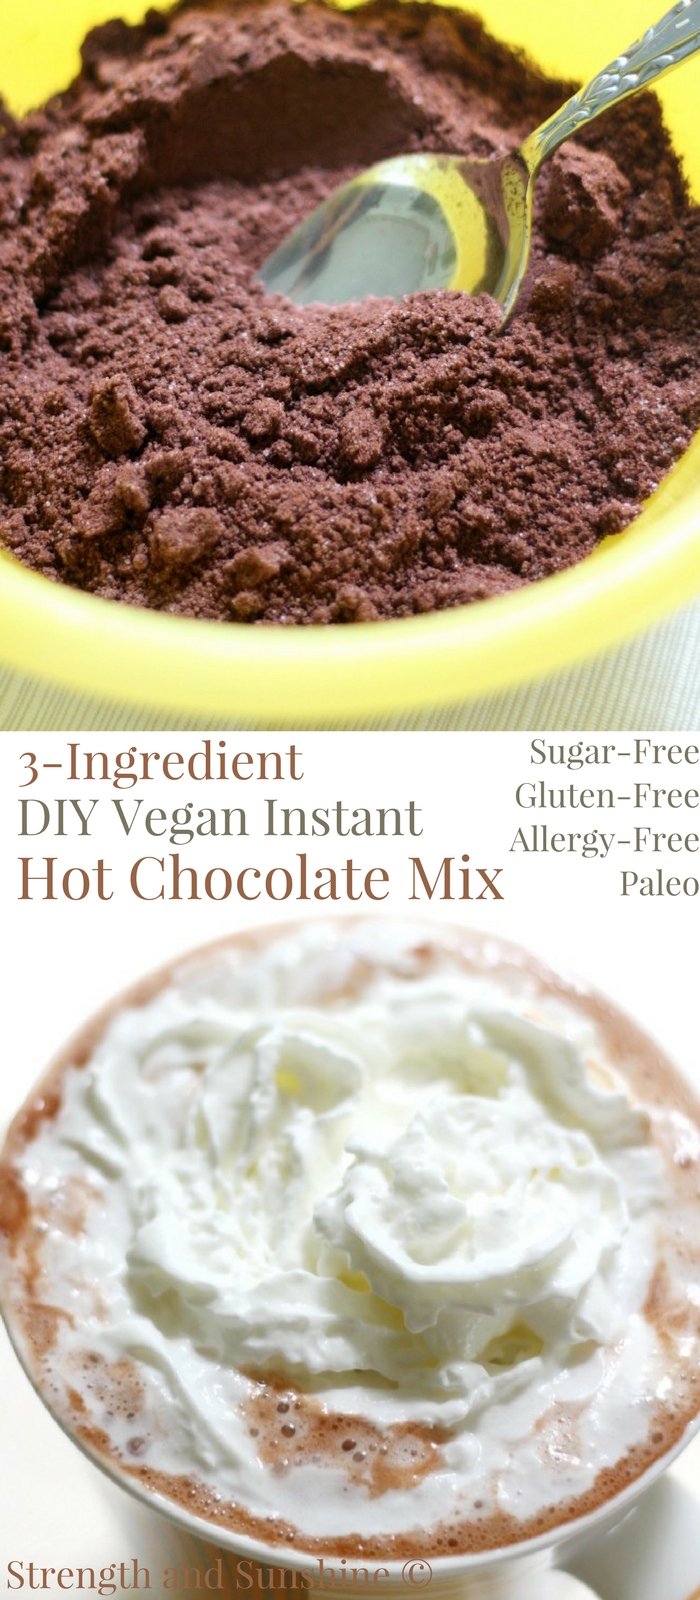 3-Ingredient DIY Vegan Instant Hot Chocolate Mix (Sugar-Free, Gluten-Free, Paleo) | Strength and Sunshine @RebeccaGF666 A super simple 3-Ingredient DIY Vegan Instant Hot Chocolate Mix you can whip up in a flash! Sugar-free, gluten-free, paleo, and top-8 allergy-free, this healthy hot cocoa mix recipe is perfect for holiday gifts or stocking the pantry with a quick a cozy drink to warm the soul! #hotchocolate #hotcocoa #holidays #vegan #sugarfree #glutenfree #paleo #chocolate